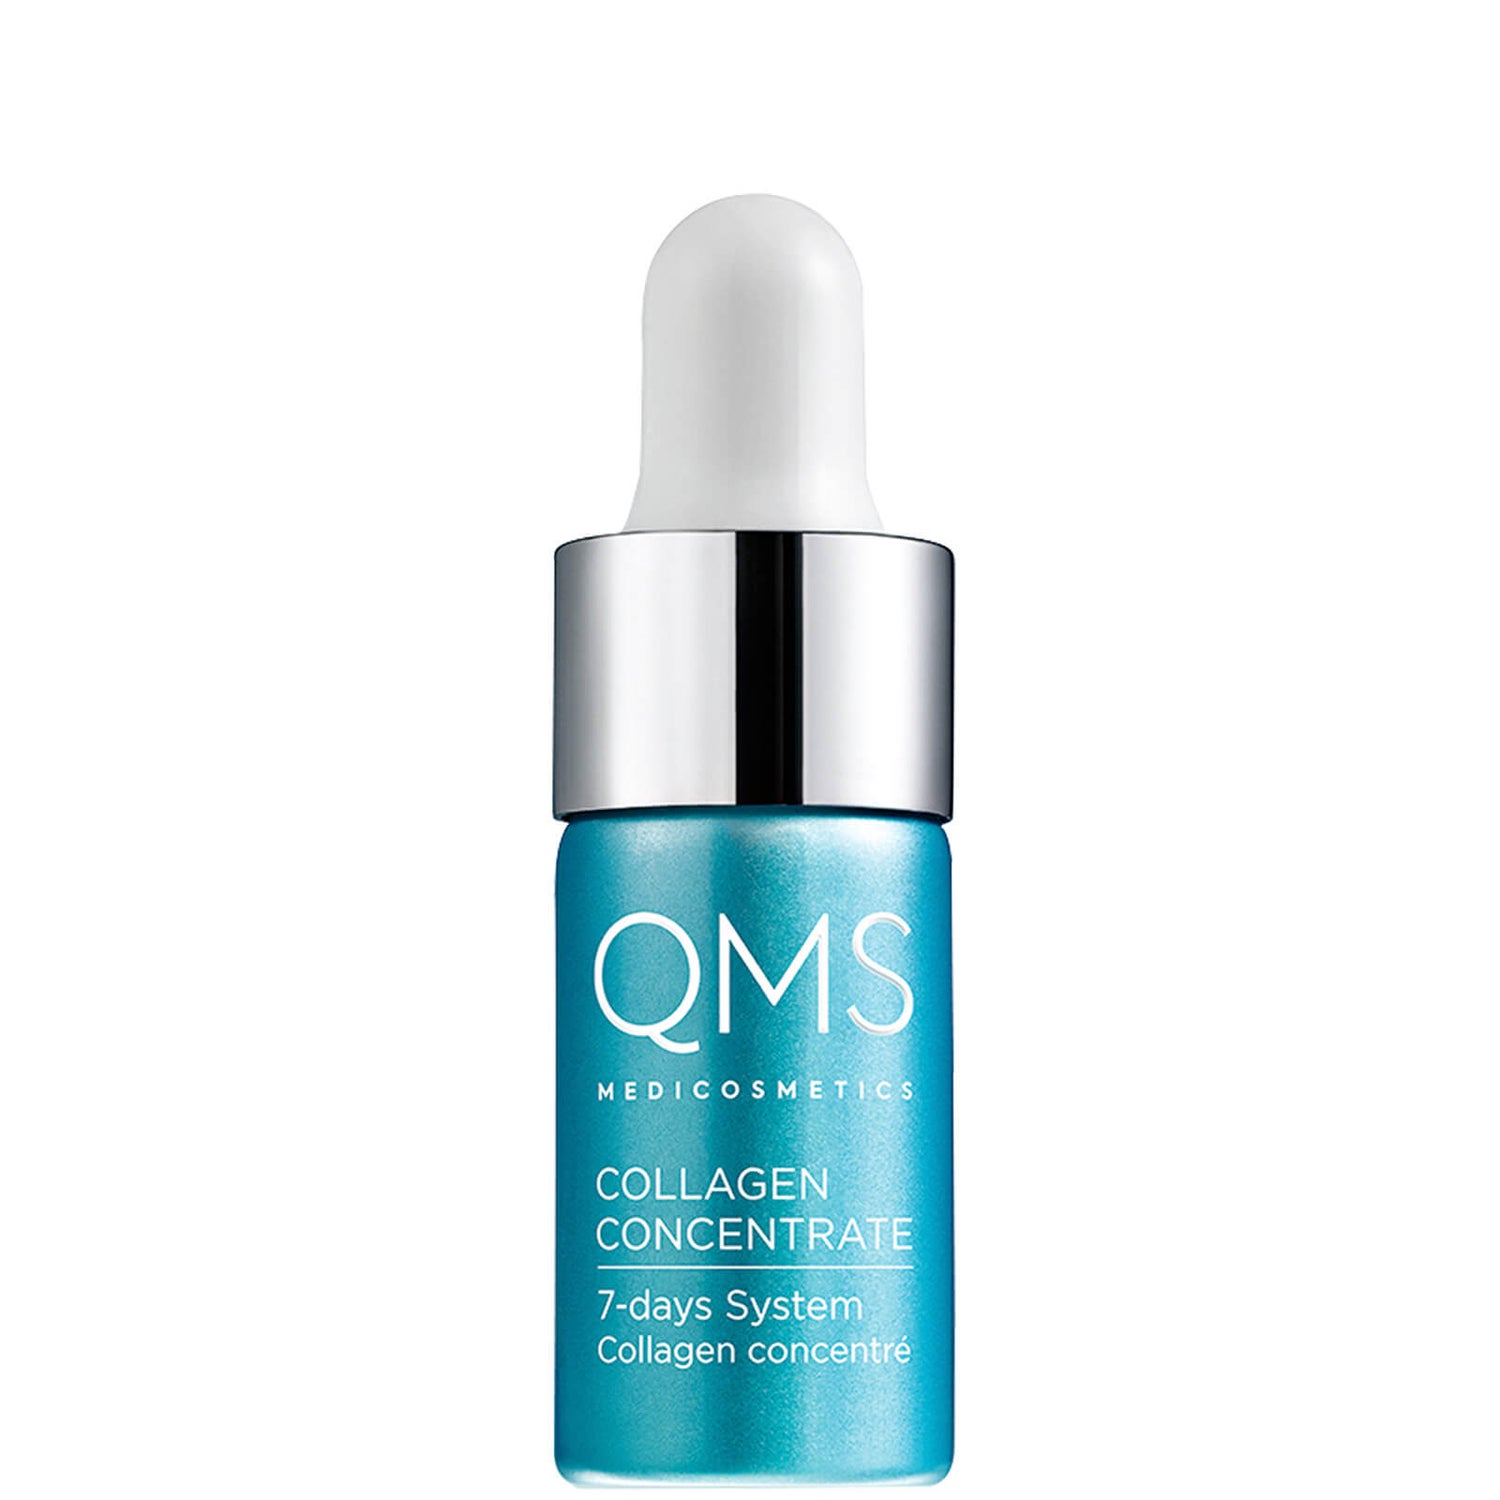 QMS Medicosmetics Collagen Concentrate 7-days System